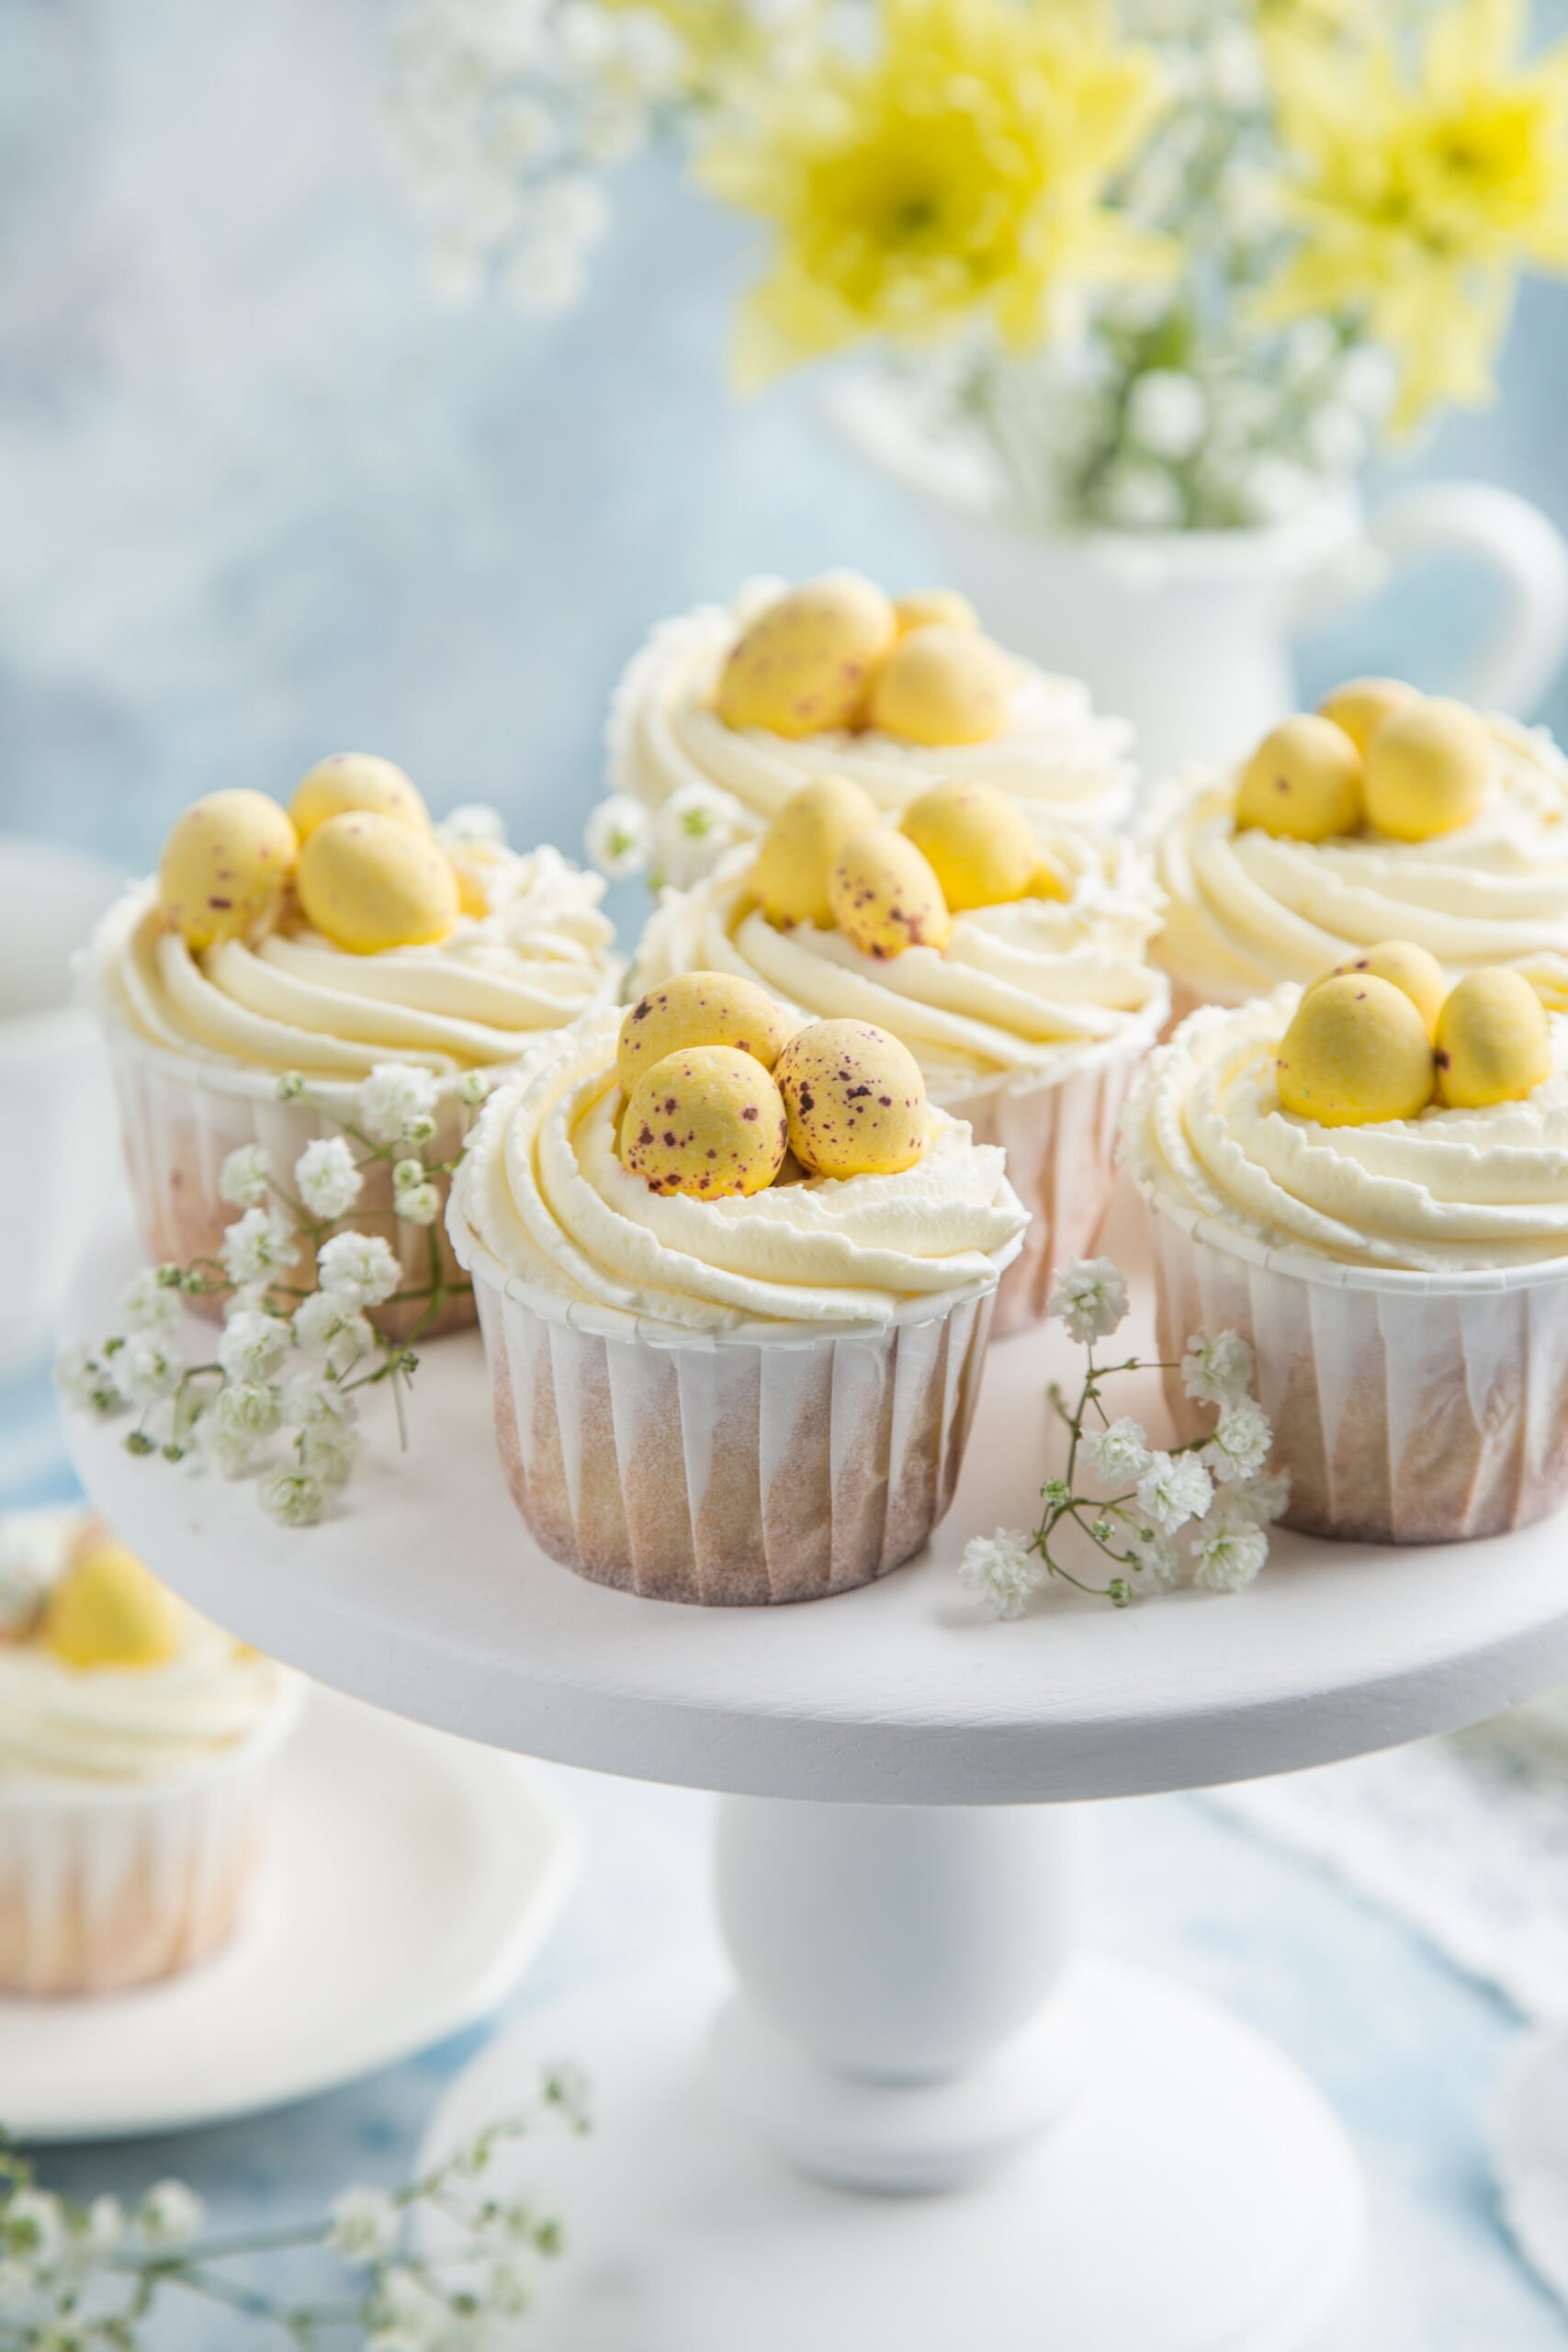 Dive into my blog for the ultimate Easy Yellow Vanilla Easter Cupcakes that'll have everyone hopping for seconds! Get expert tips, tricks, and a fail-proof cupcake guide for a sweet Easter treat that's as fun to make as it is to eat. 🧁✨